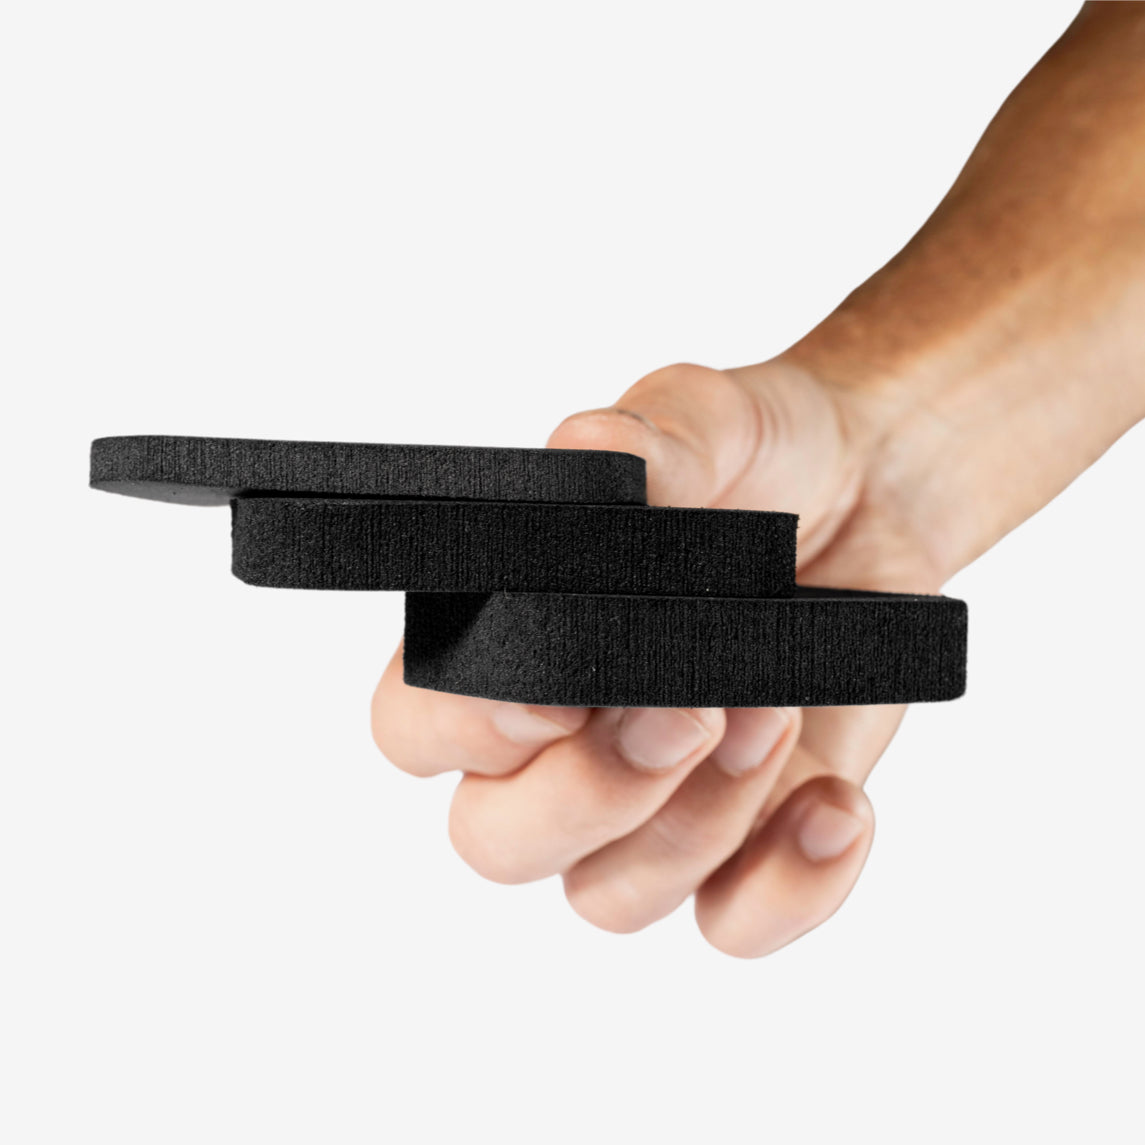 Hand holding 3 different pad sizes for the minimalist hernia belt